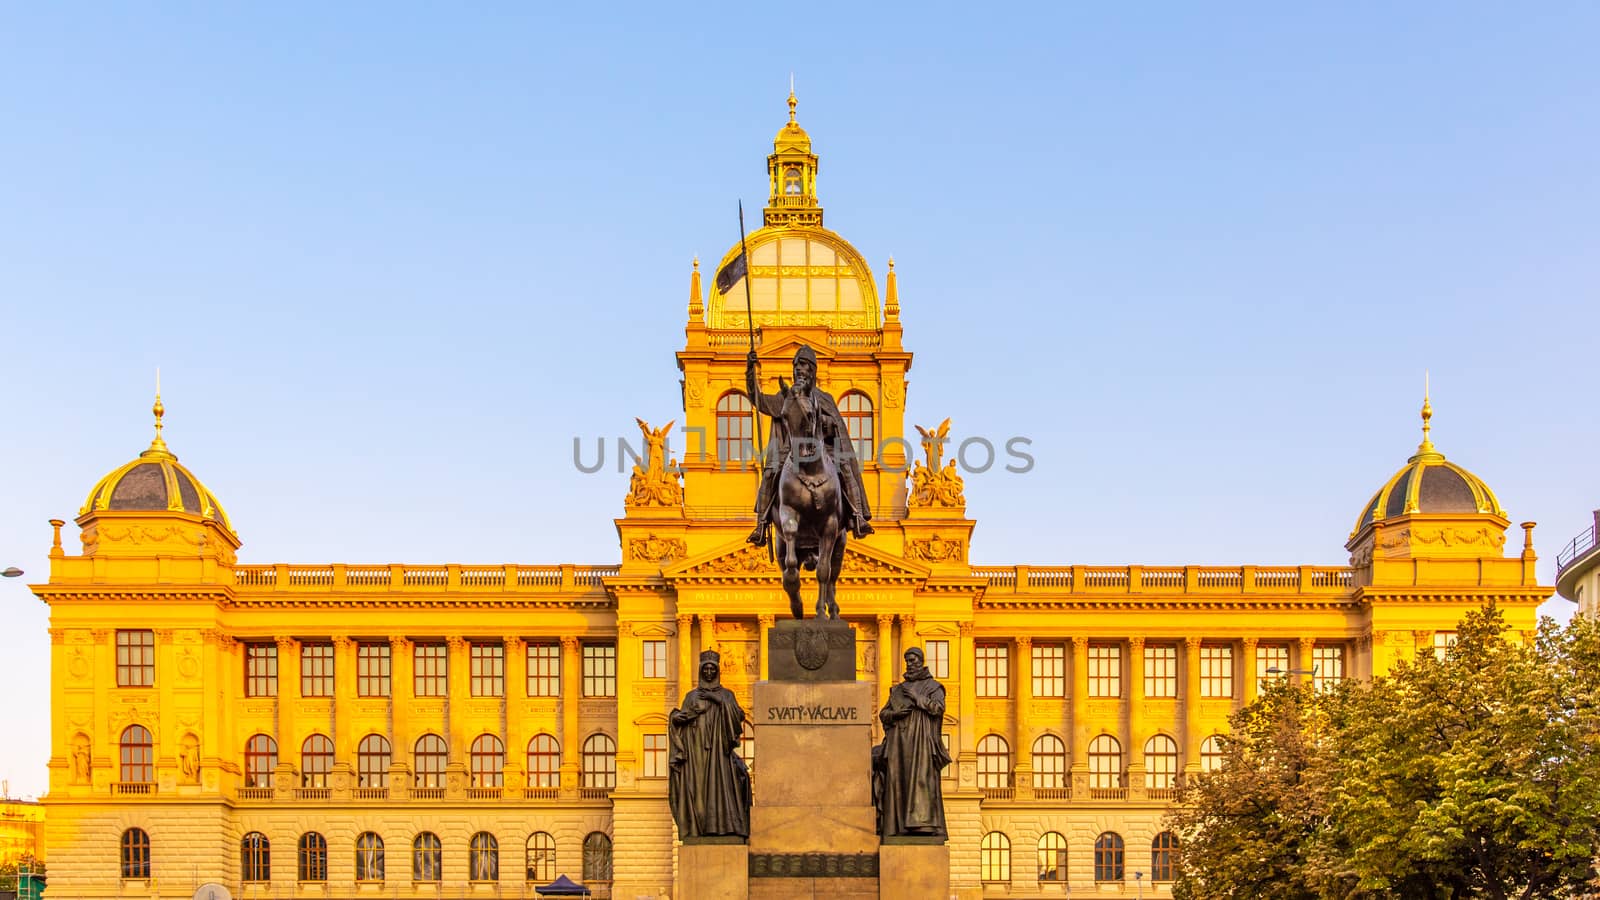 The bronze equestrian statue of St Wenceslas at the Wenceslas Square with historical Neorenaissance building of National Museum in Prague, Czech Republic.